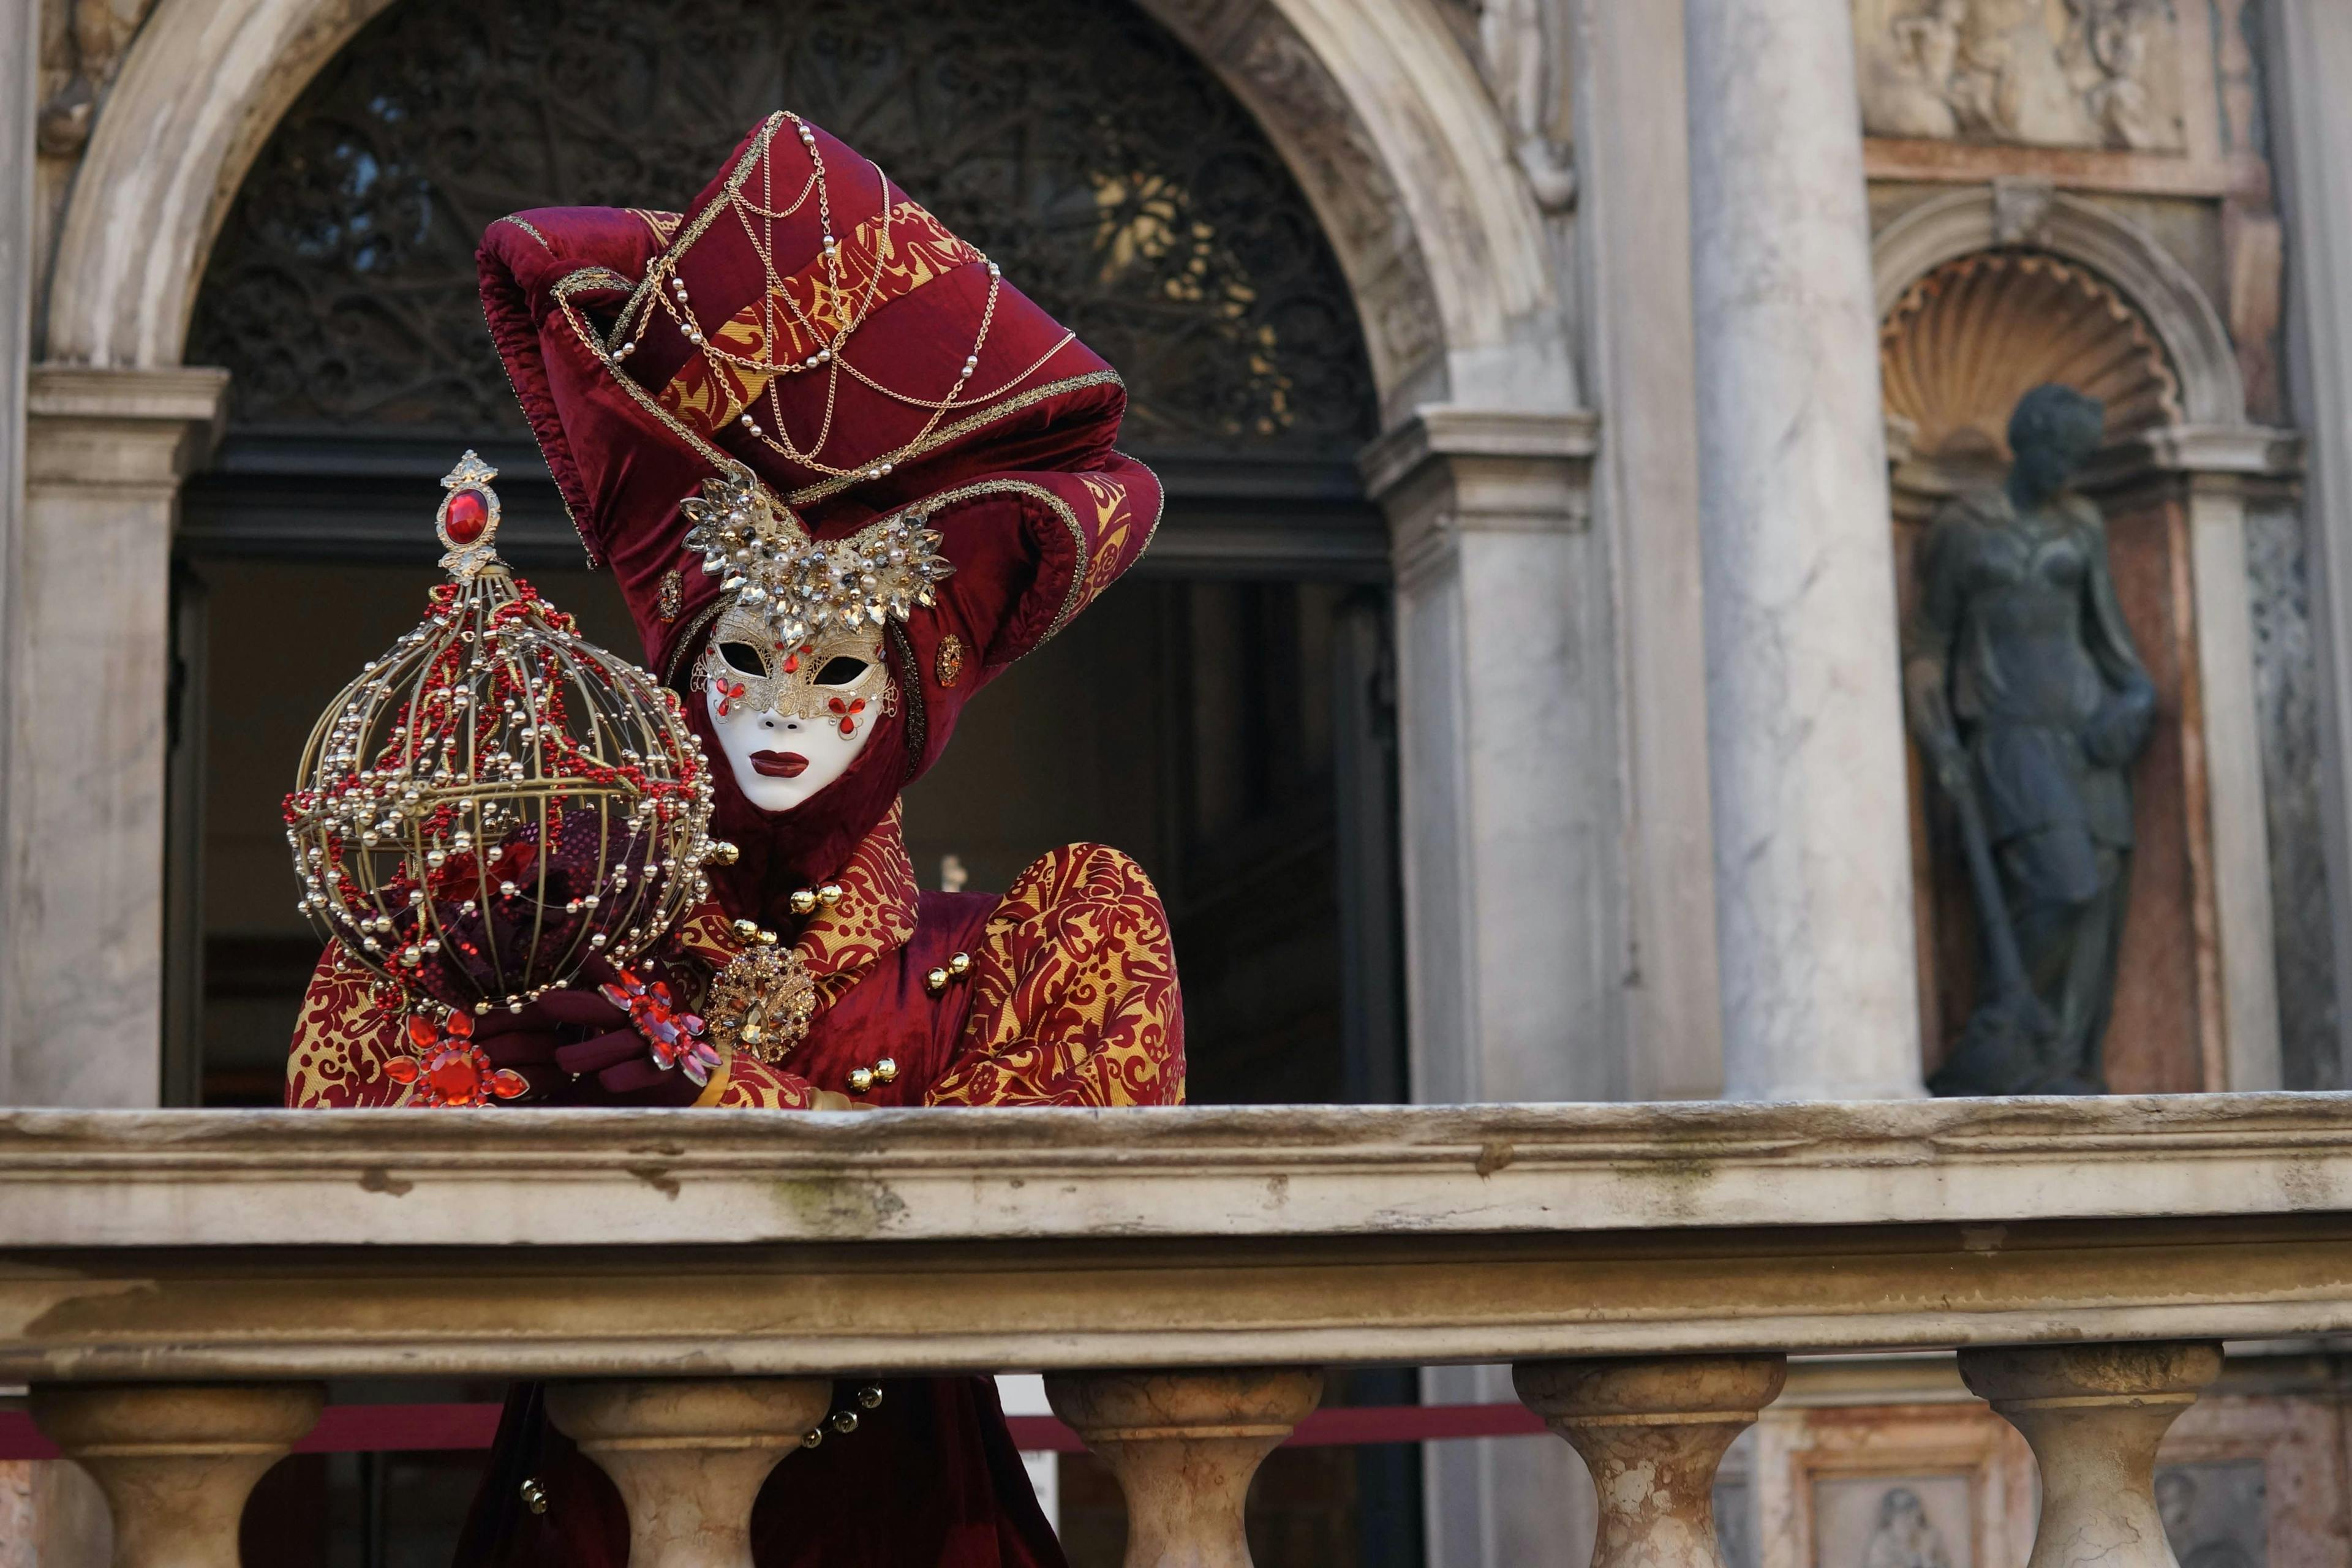 Woman wearing costume and mask in Venice carnival.